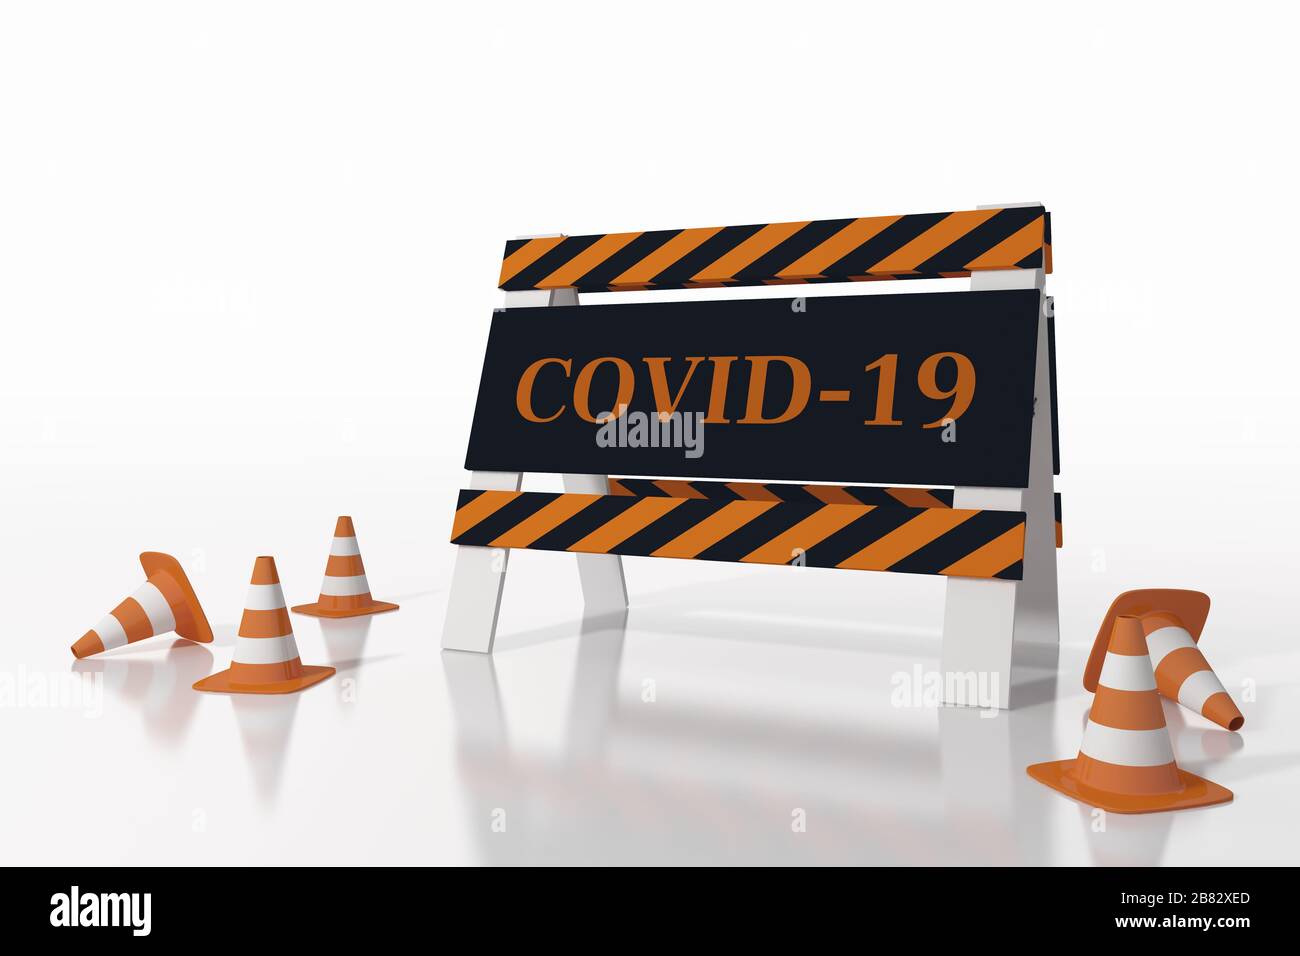 Road sign indicating closure for covid disease 19. 3D Rendering Stock Photo